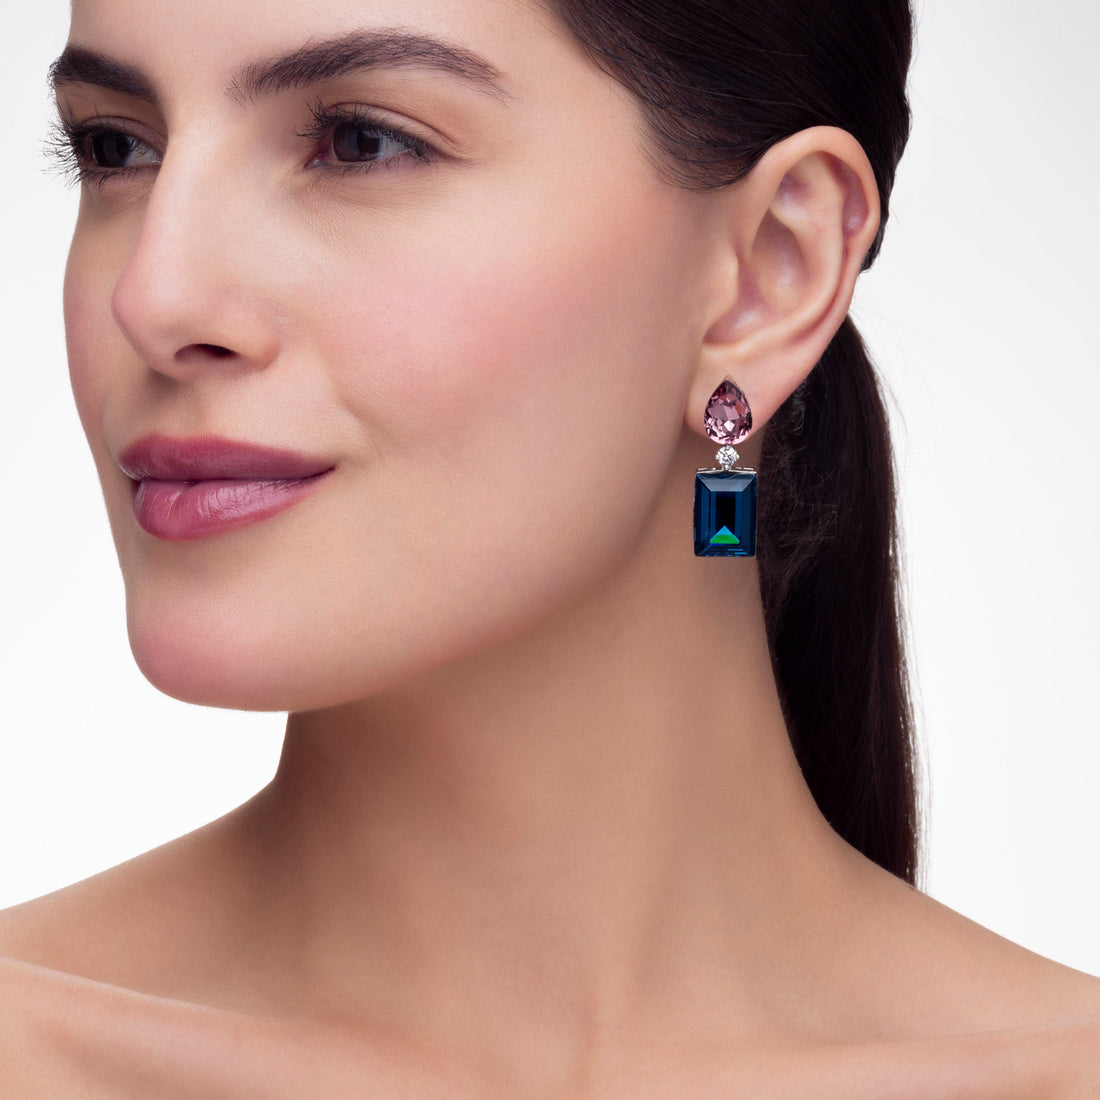 PRAO's Prestige: The Collection Emerald Stud Earrings